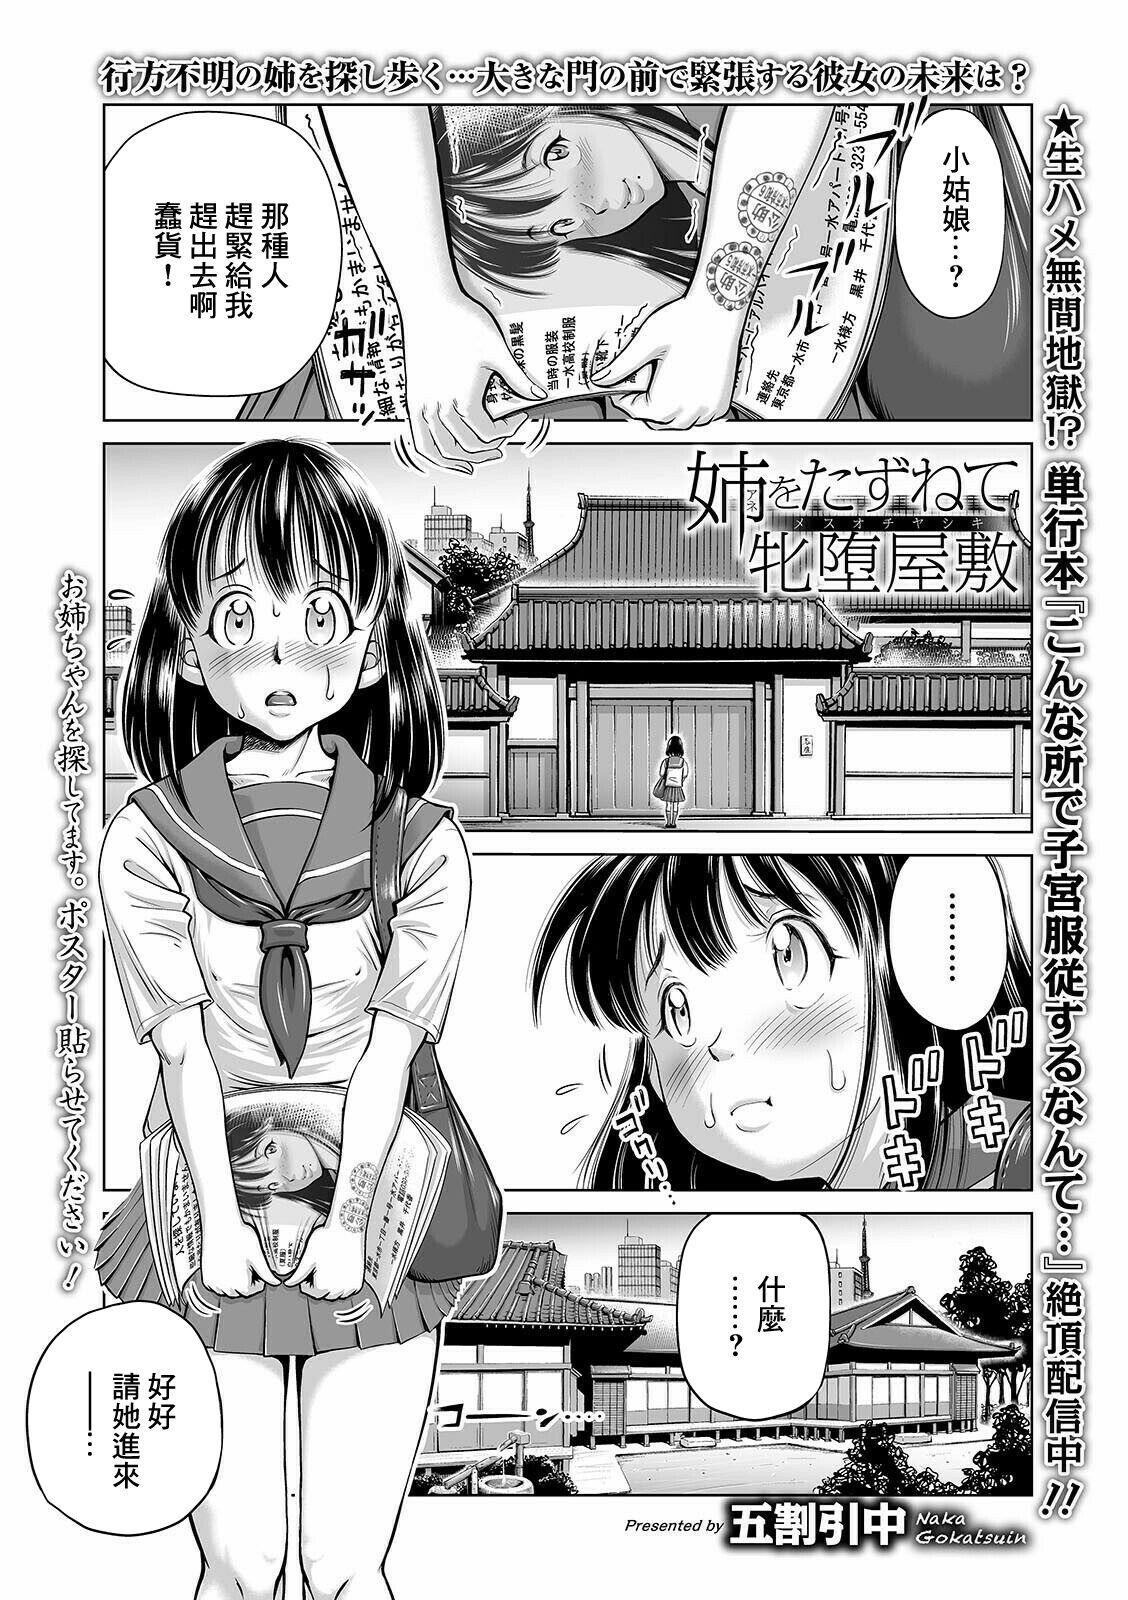 Police 姉をたずねて牝墜屋敷 Female Orgasm - Page 1